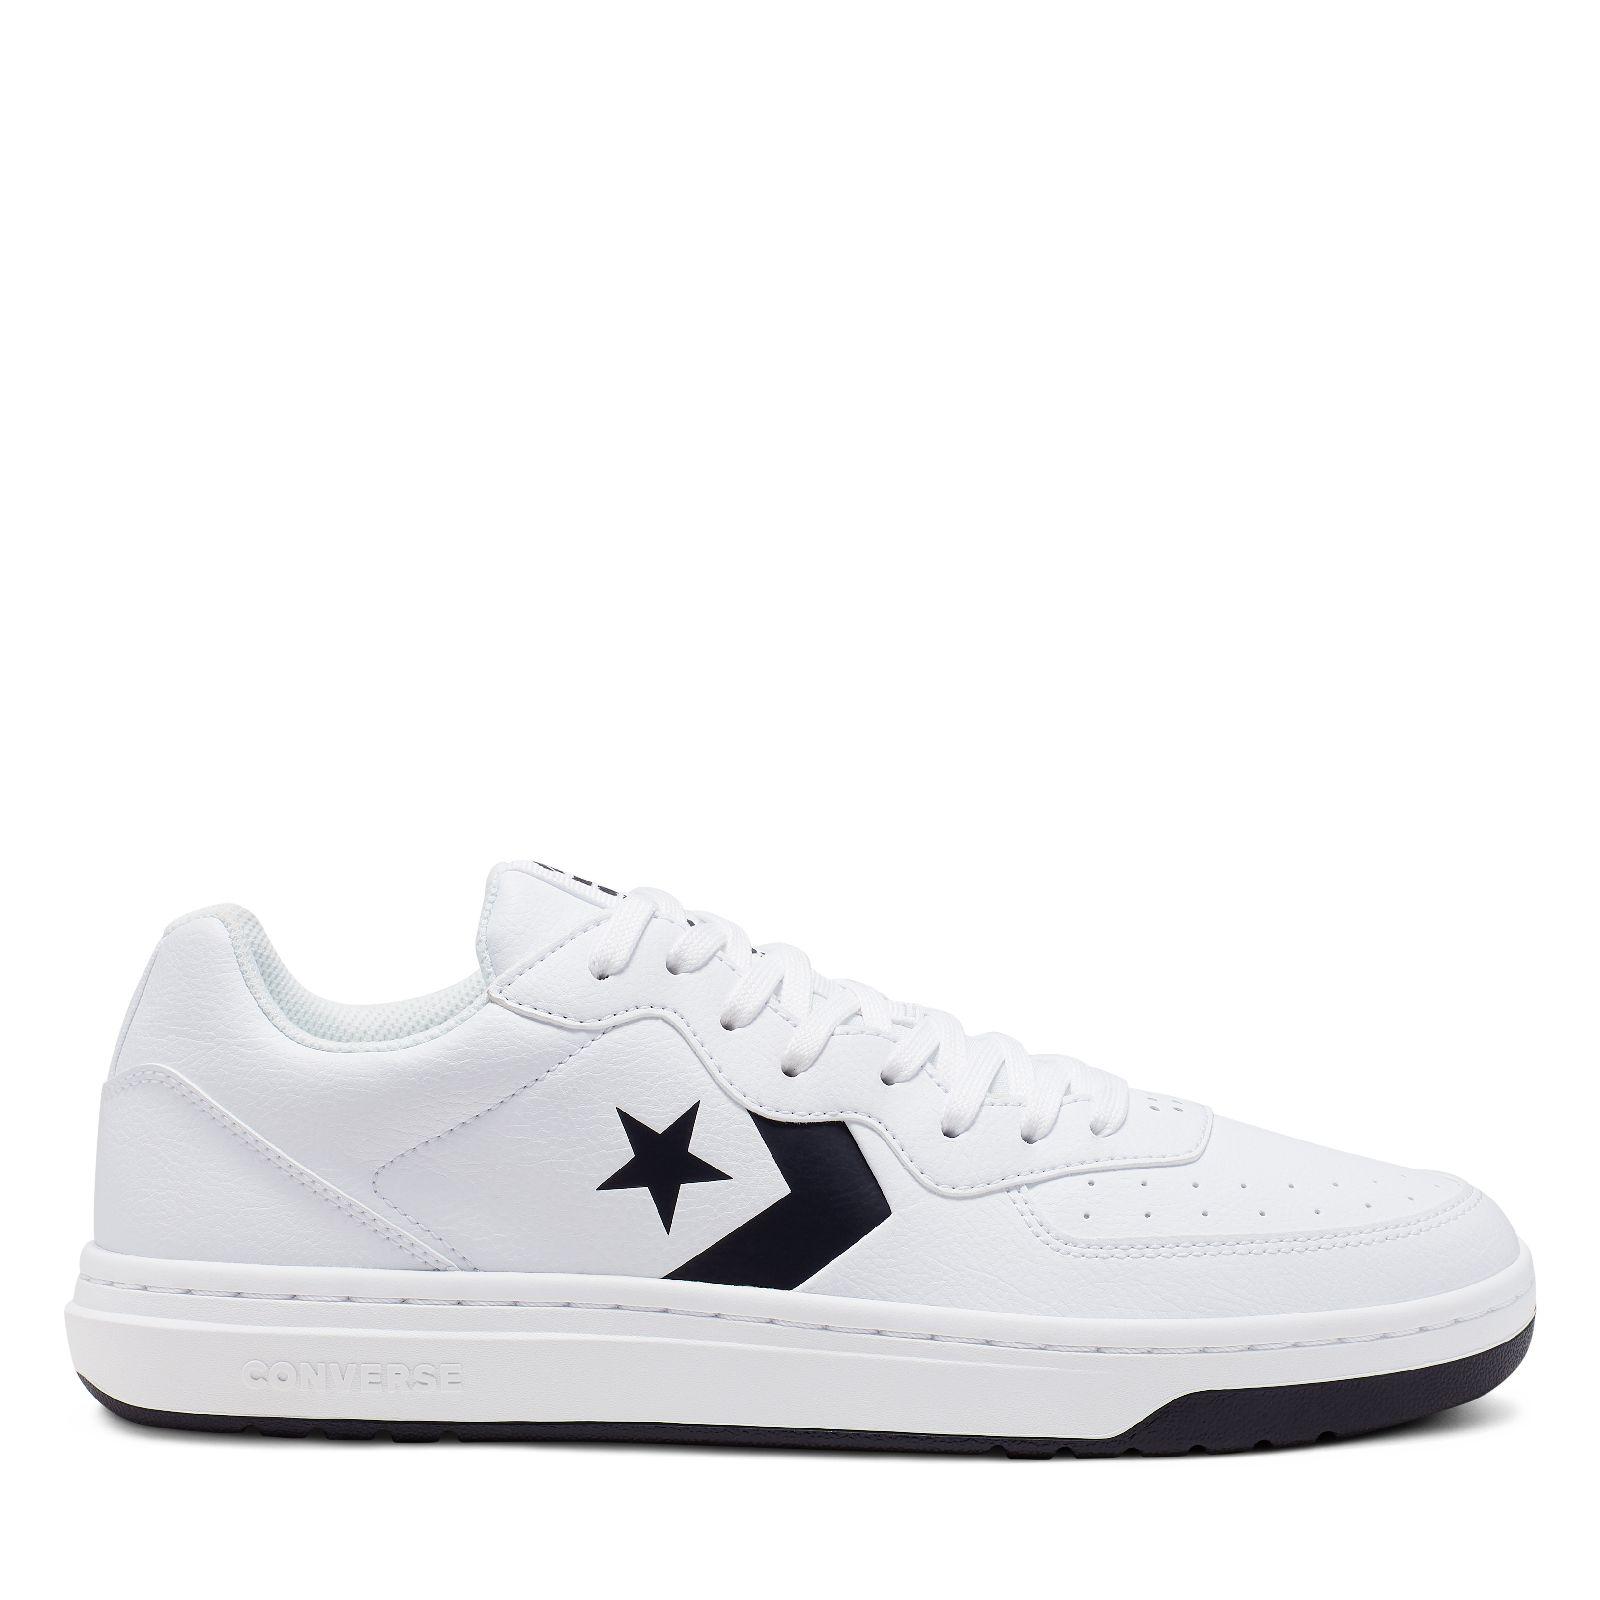 converse low profile leather